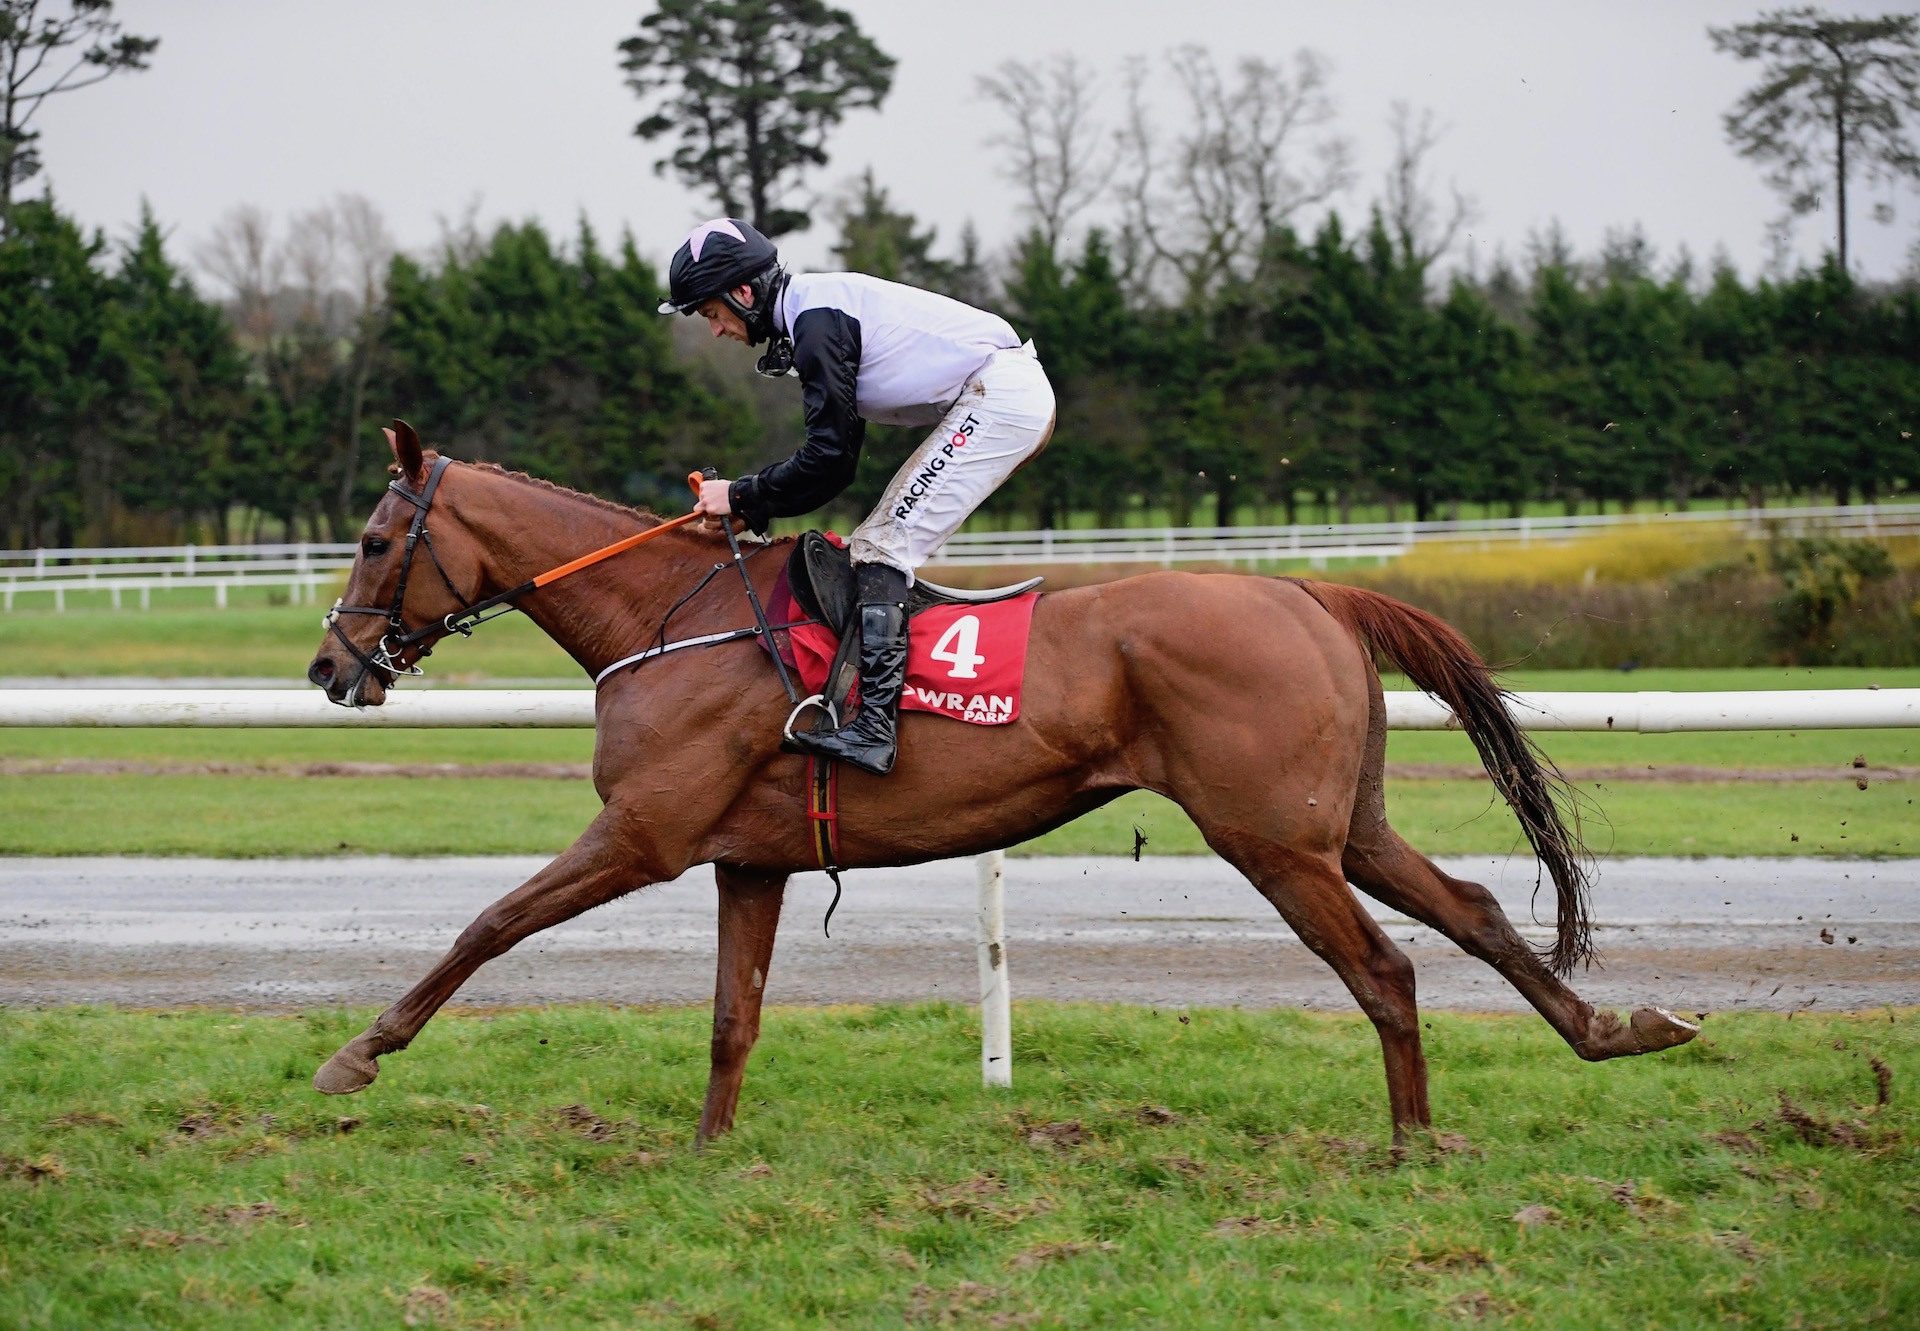 Journey With Me (Mahler) Wins The Bumper At Gowran Park